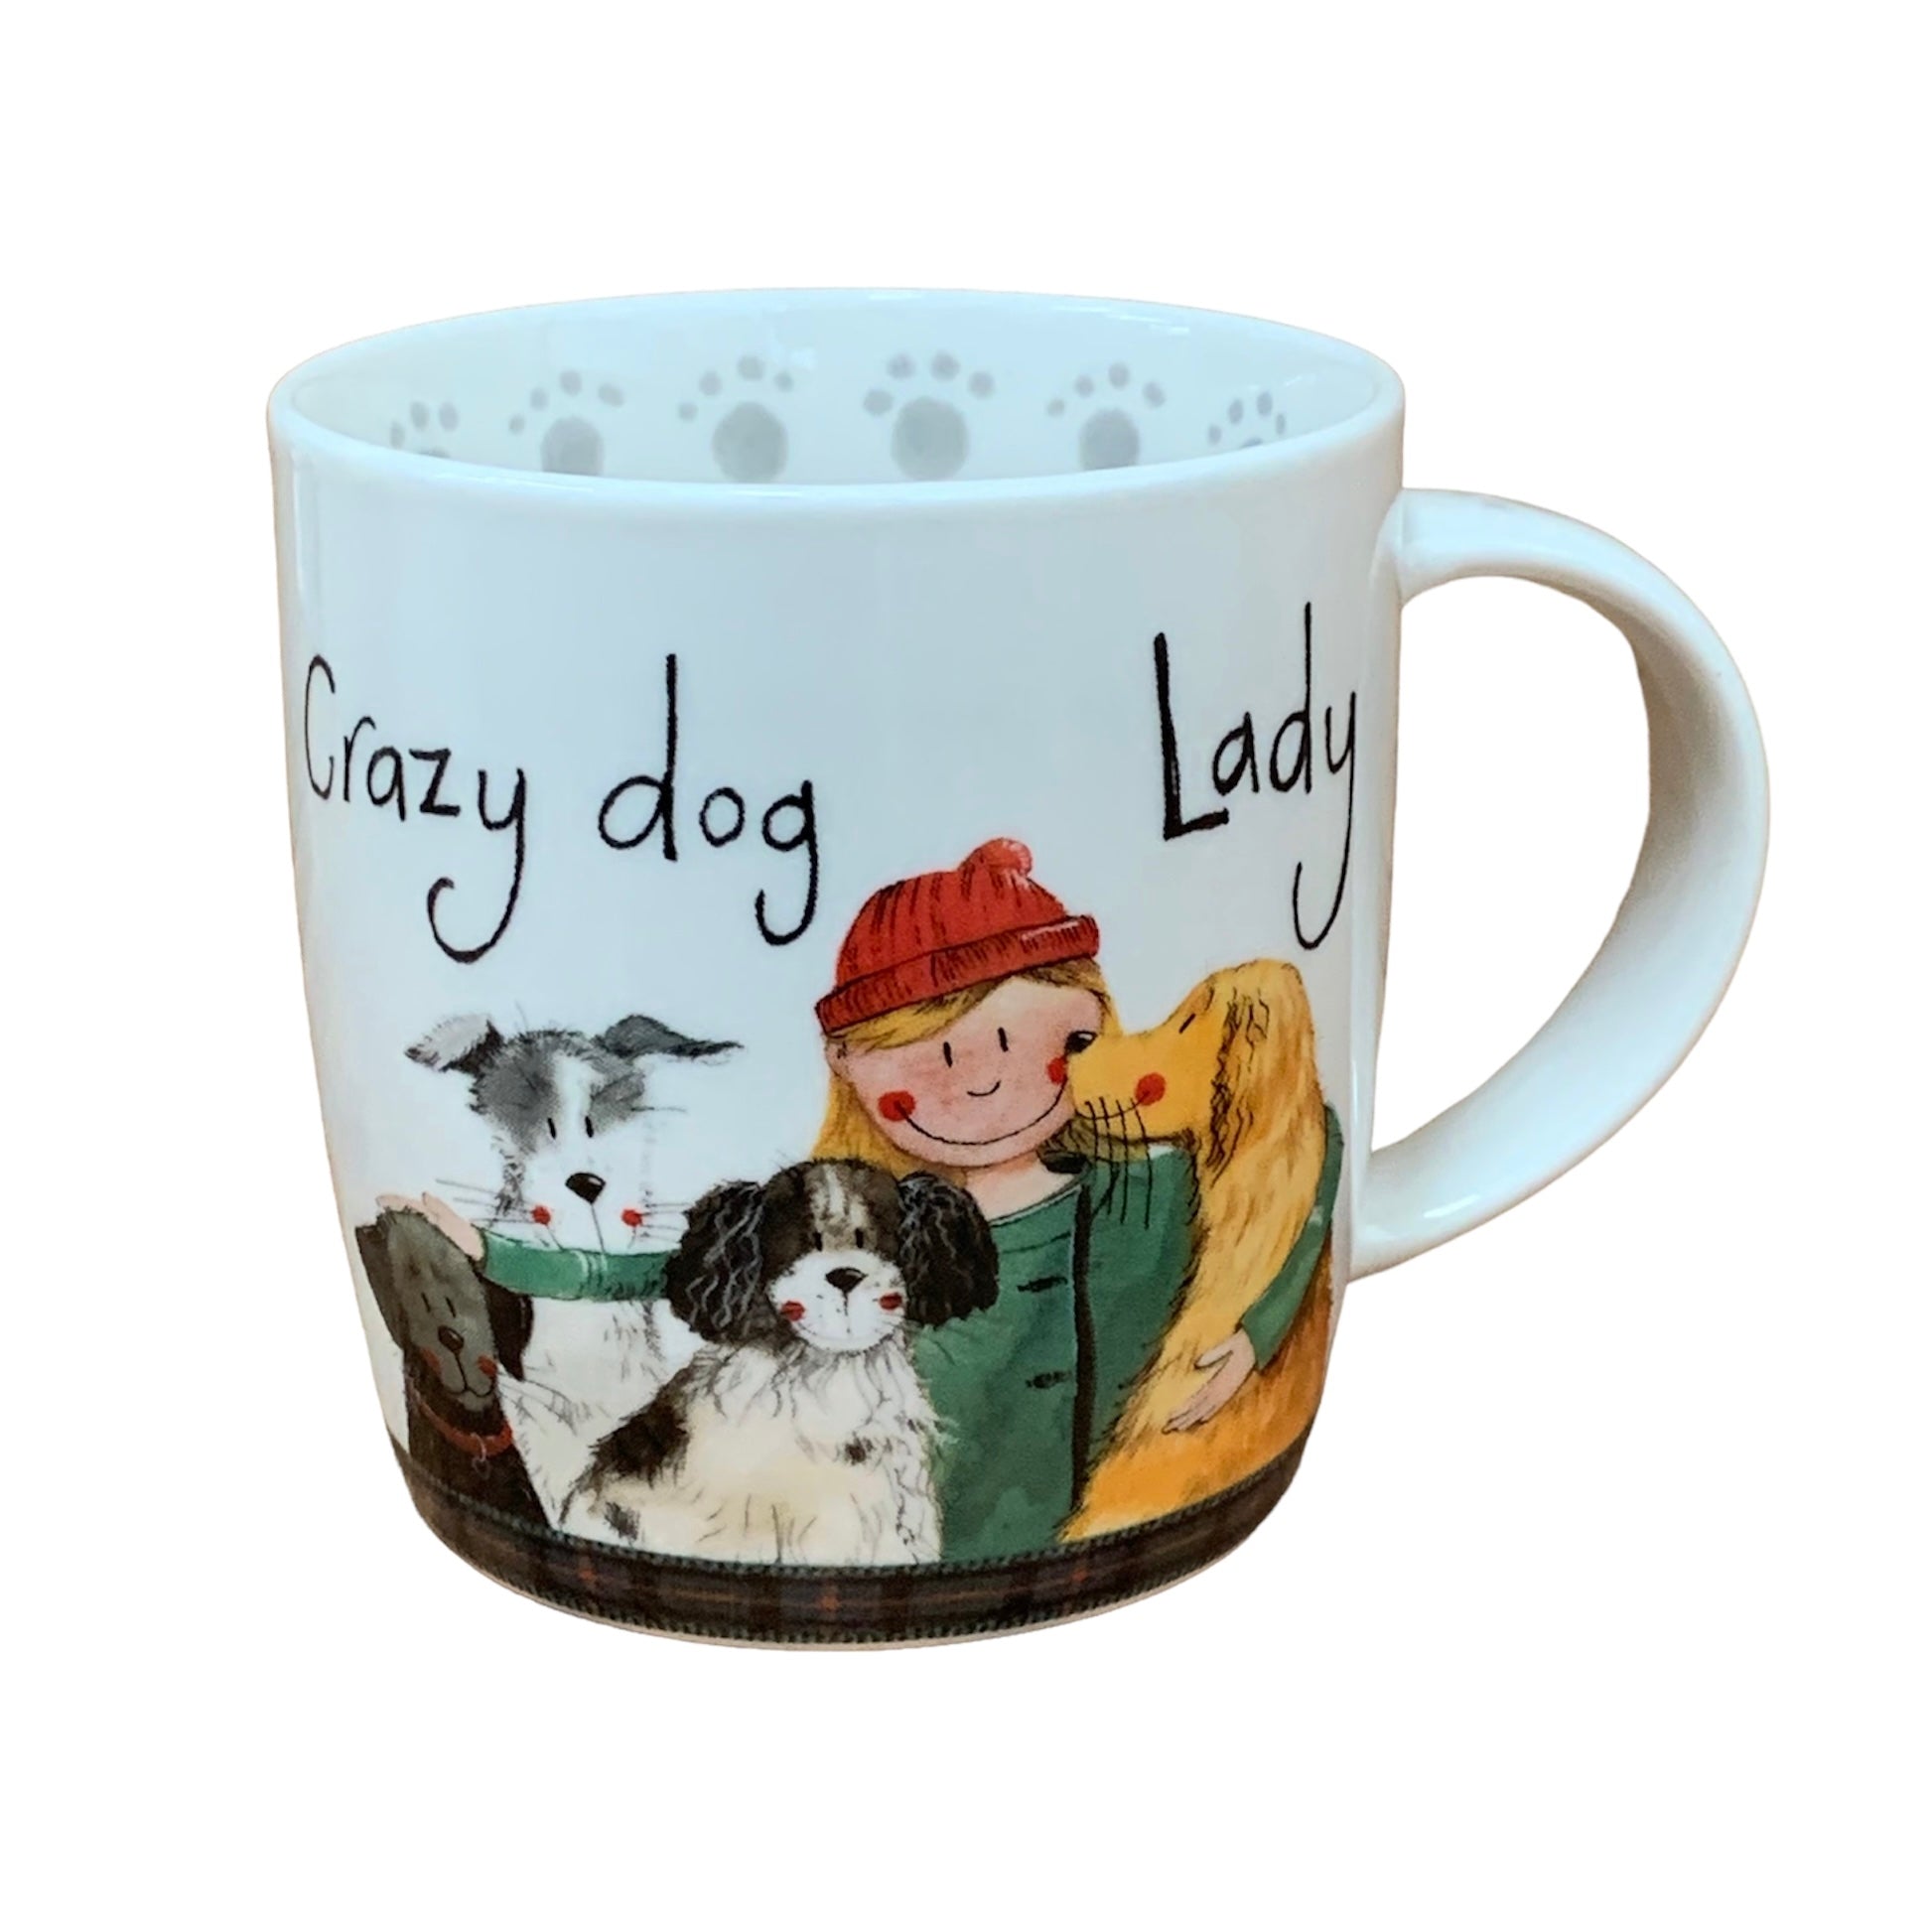 This Alex Clark mug portrays a lady with her beloved dogs, making it perfect for coffee, tea, and other hot beverages. Additionally, the mug showcases illustrations around the inside rim and down the handle, adding to its charm and uniqueness.